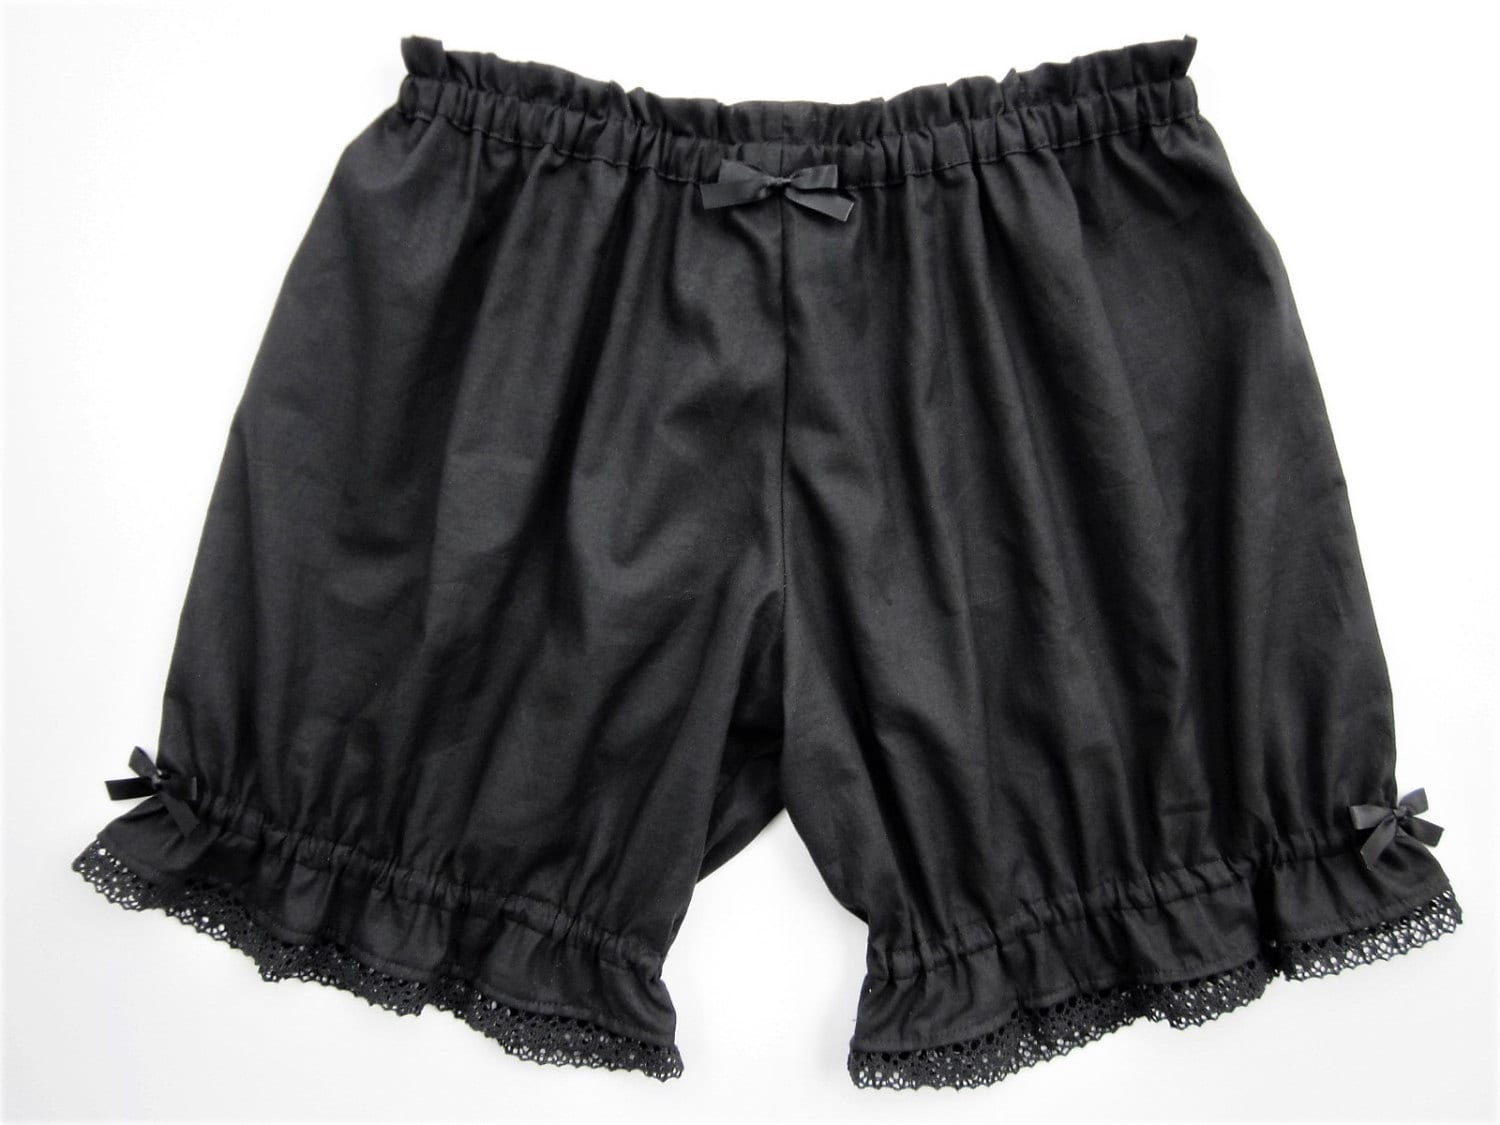 Womens Bloomers / Black Cotton with Lace / Pajama Shorts